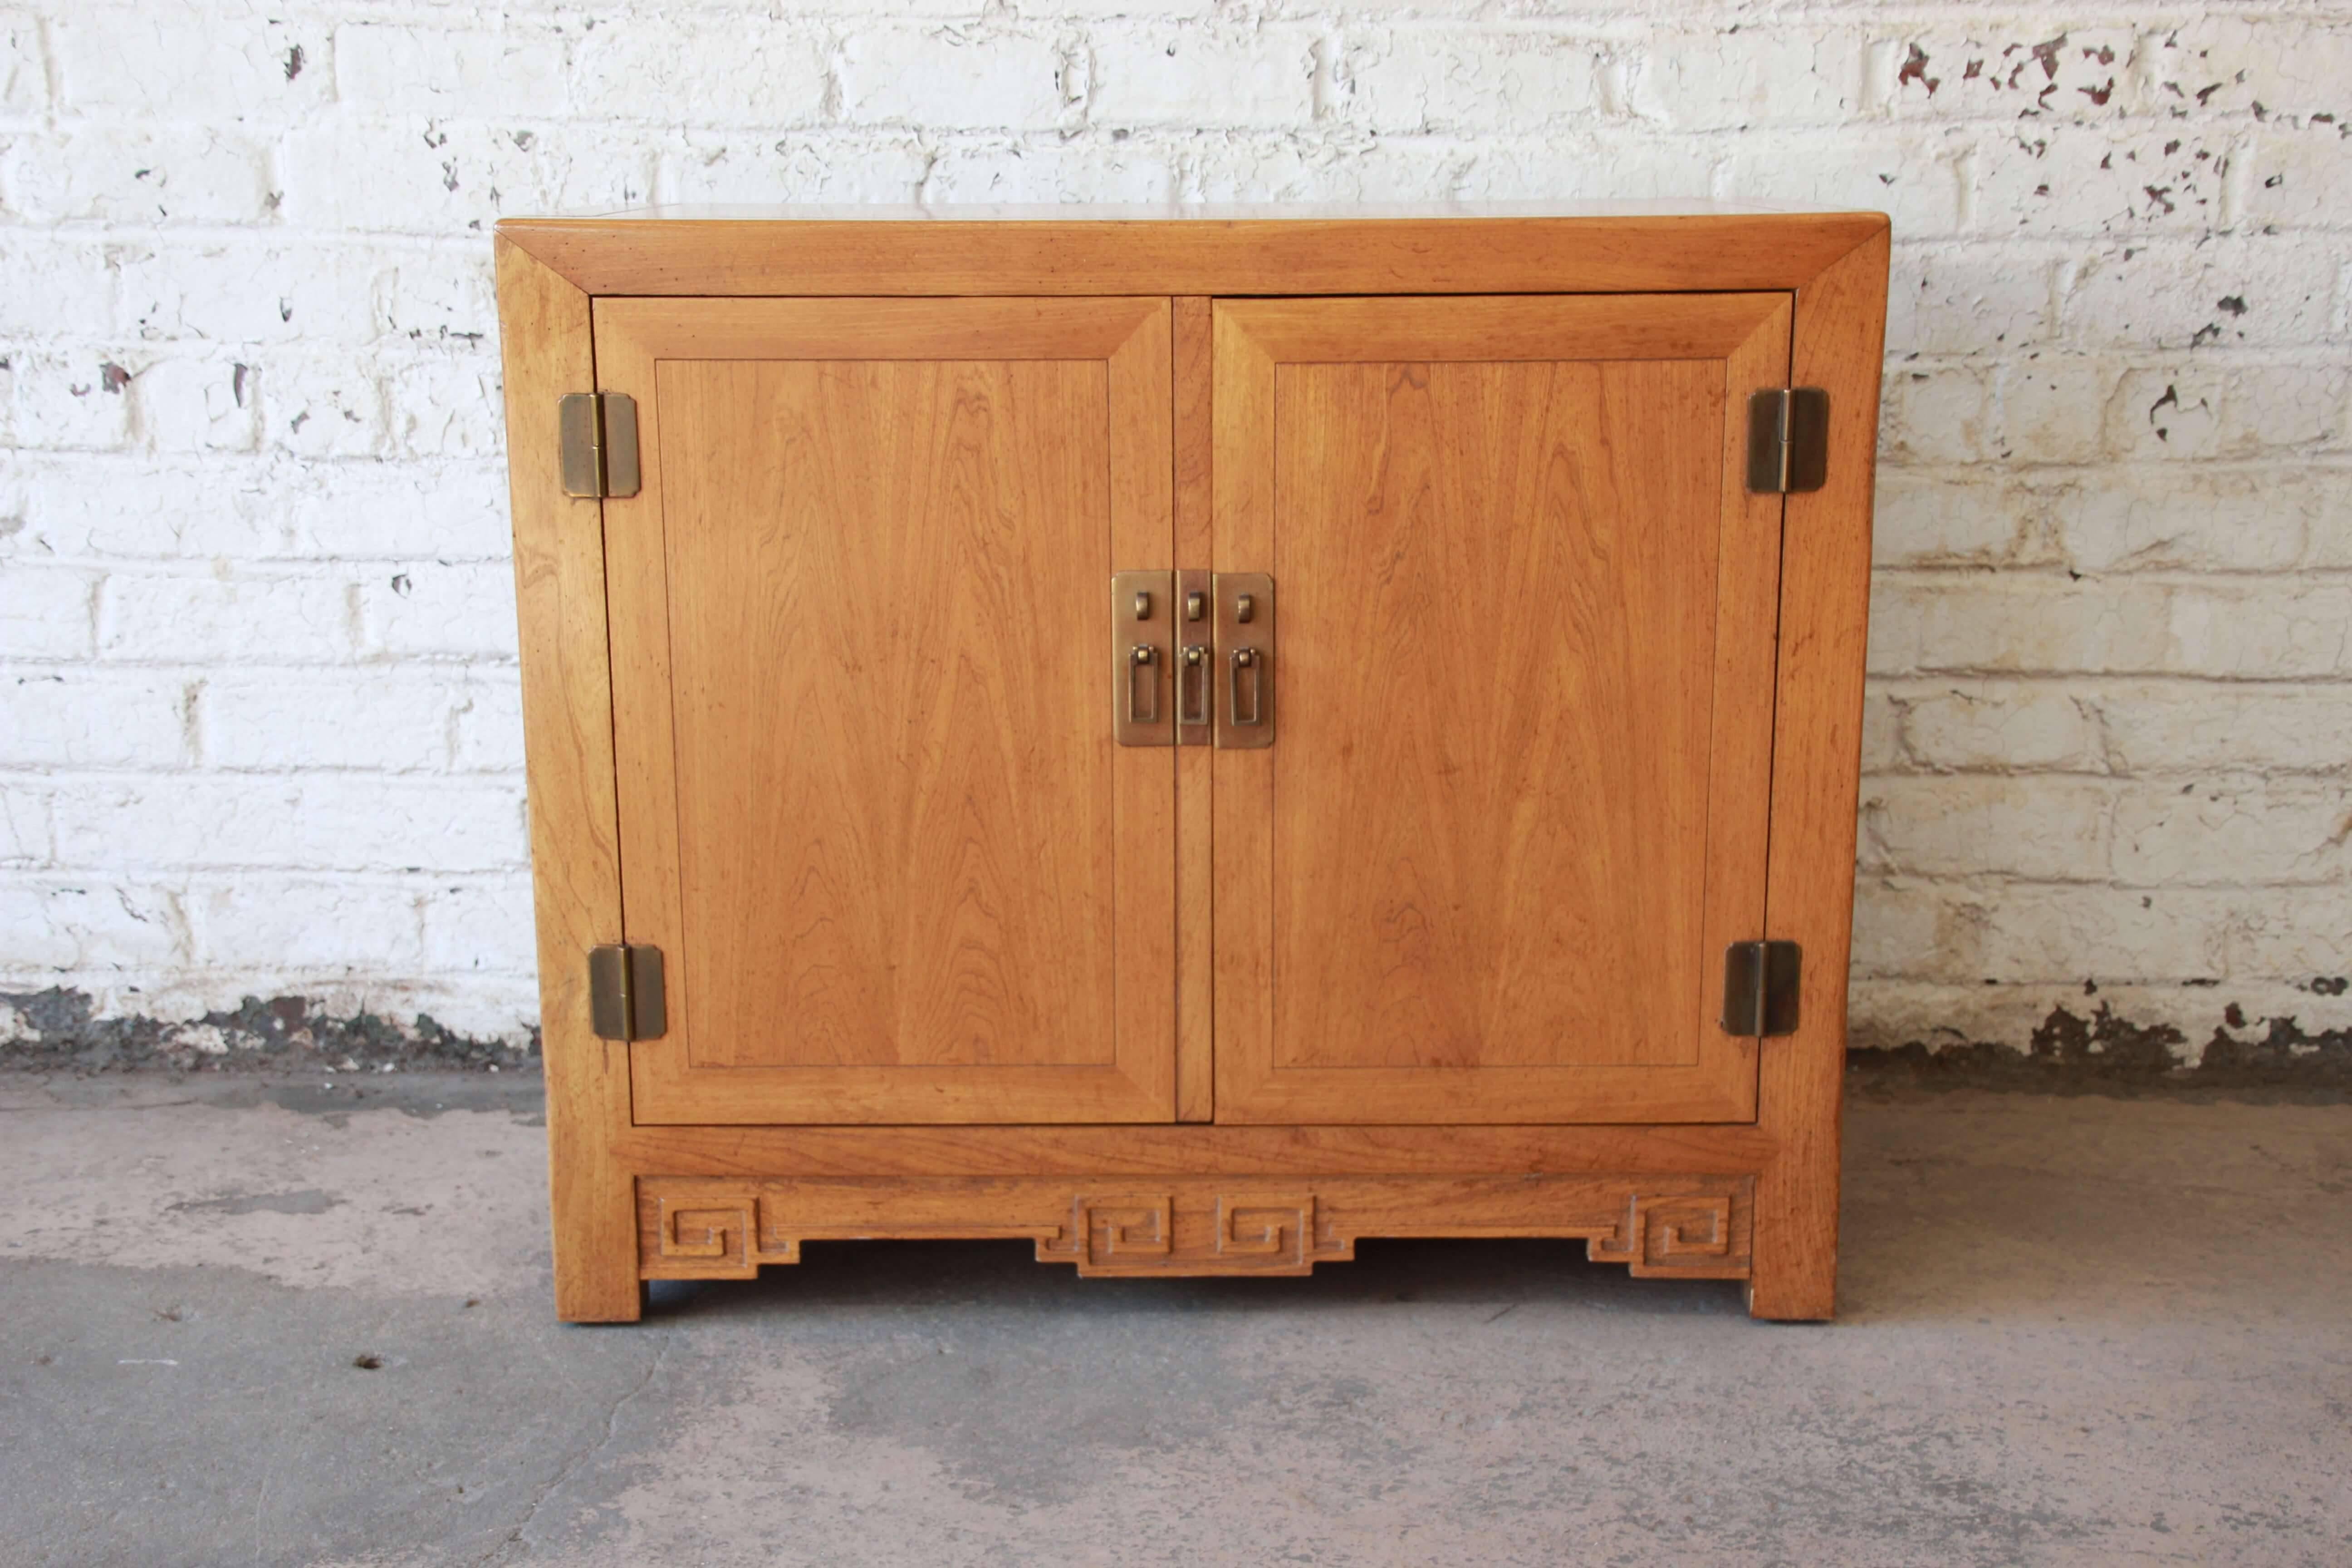 Offering a very nice Baker Furniture elm wood chinoiserie server or butler's stand. The piece has beautiful Asian inspired hardware and carvings. The two cabinet doors open up to a large drawer and a shelf for storage. This piece is made from solid